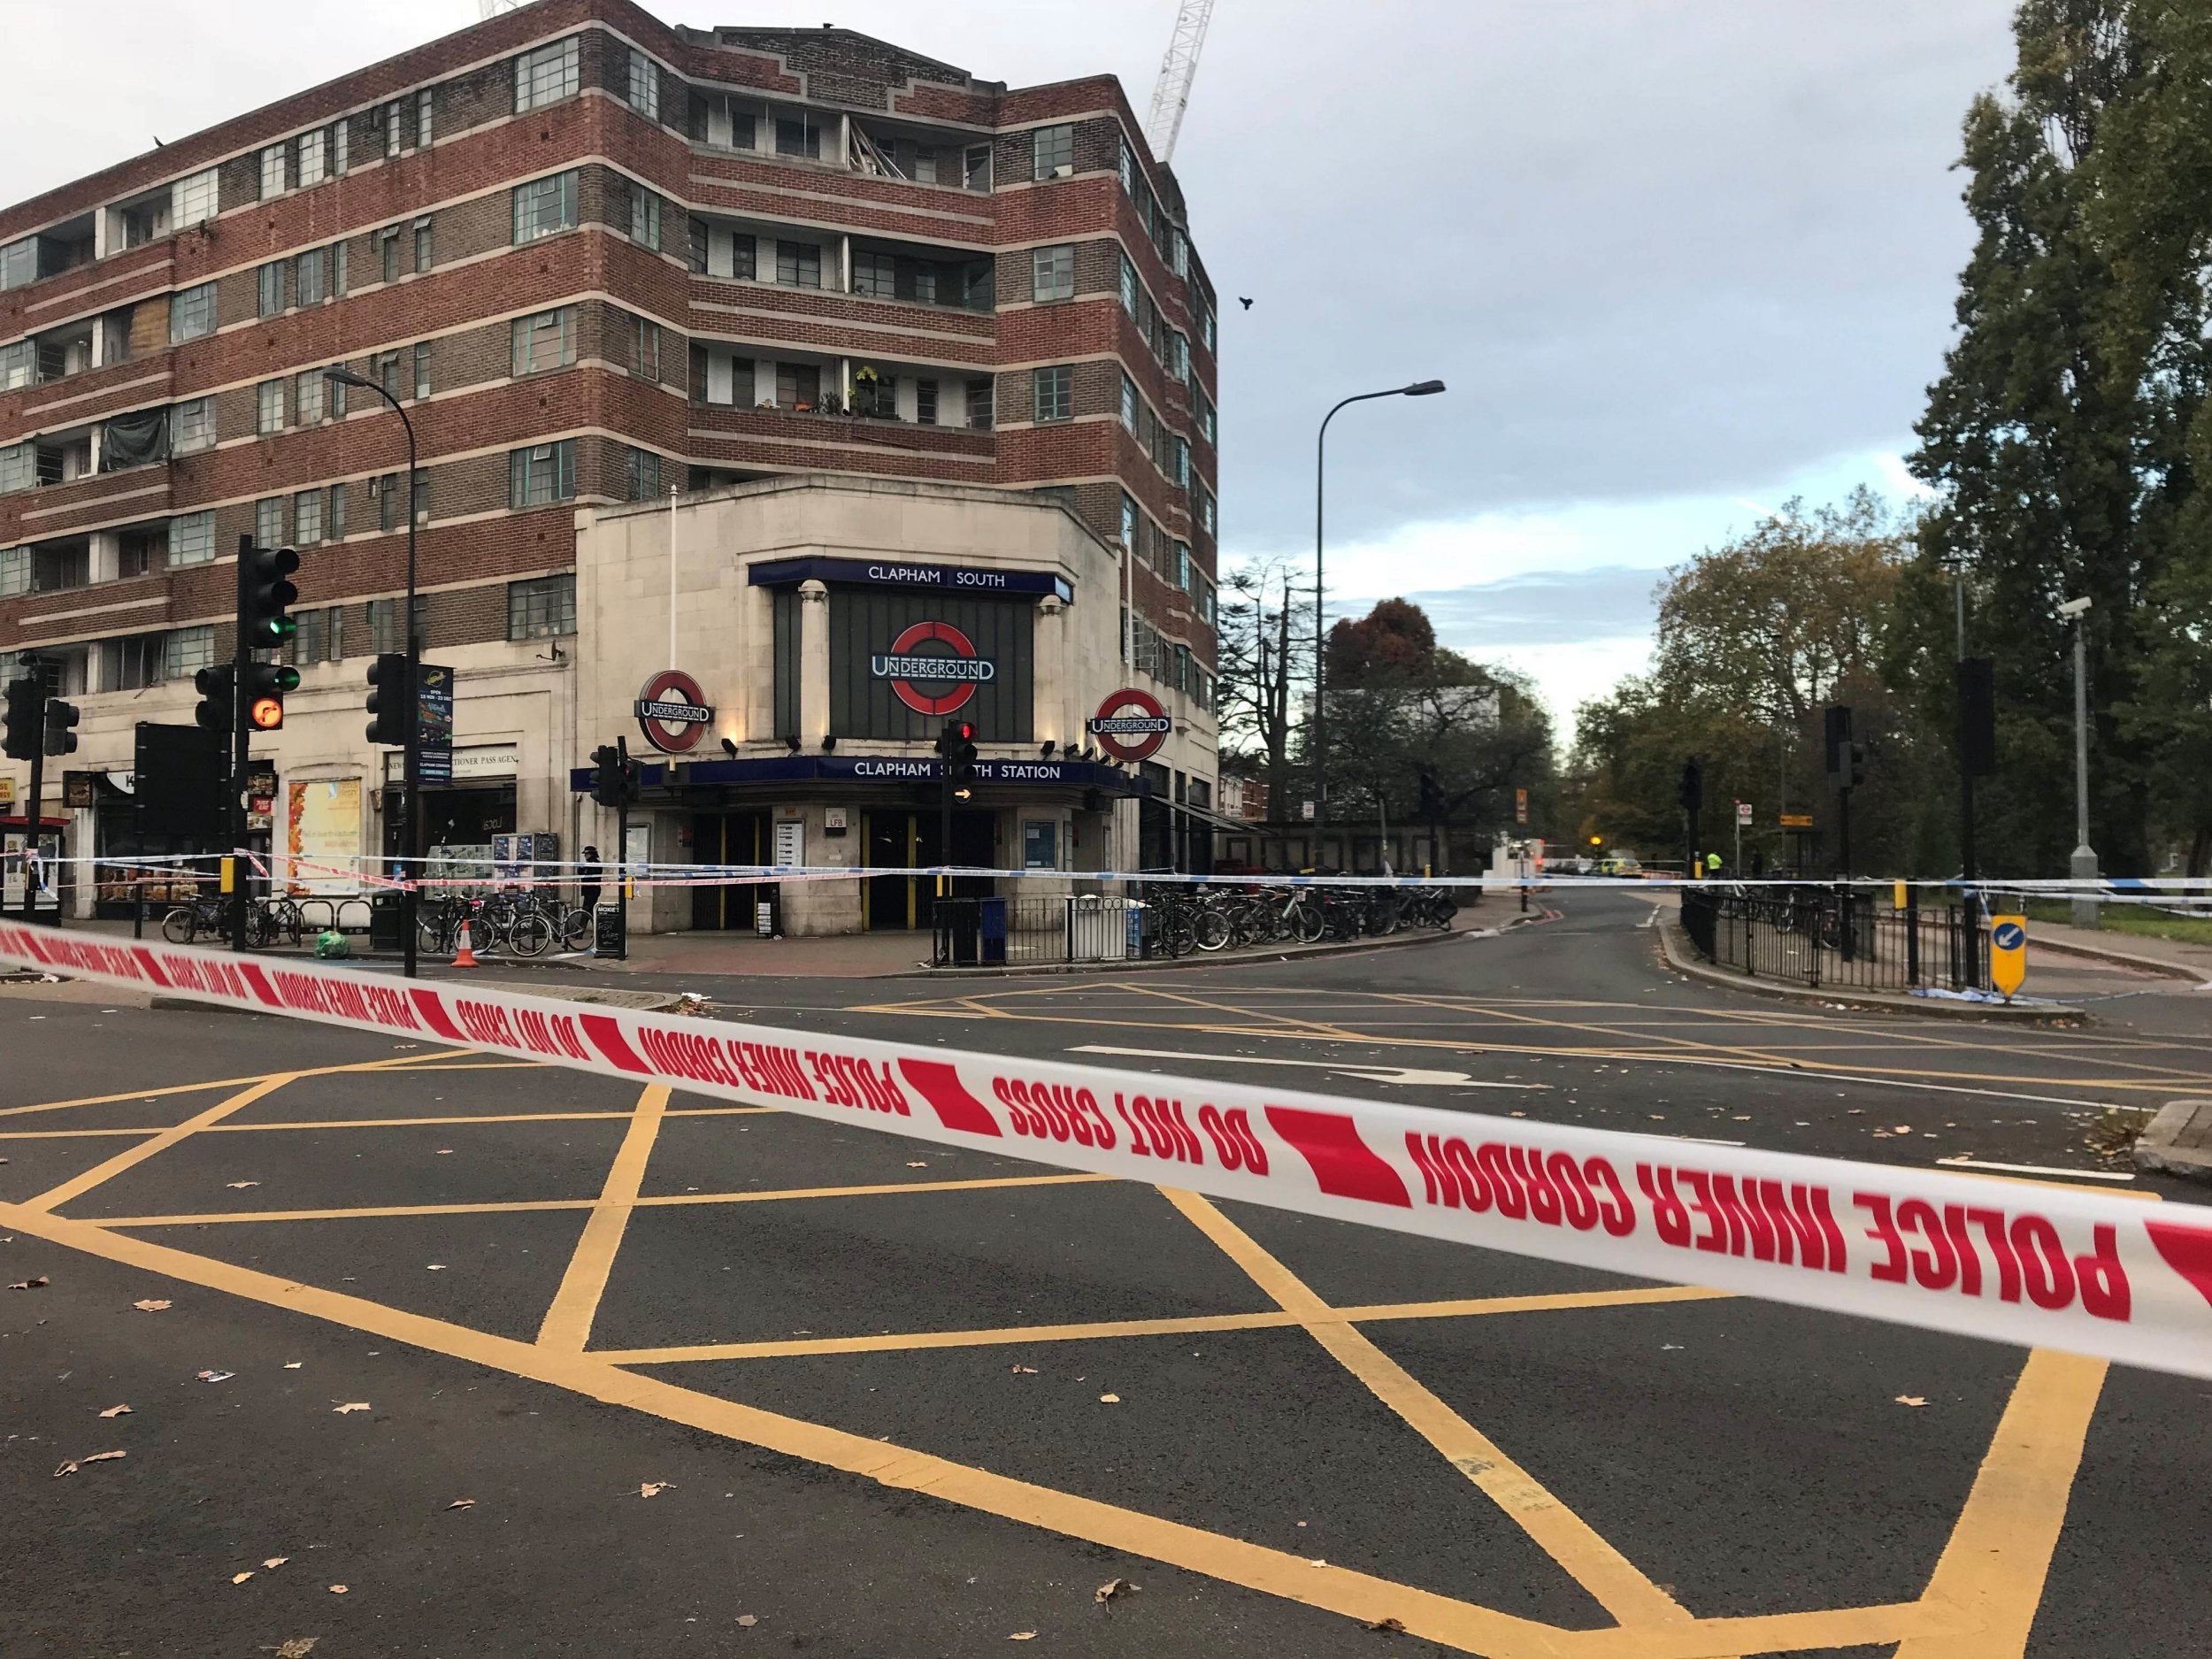 A 17-year-old boy was stabbed outside Clapham South station on Friday